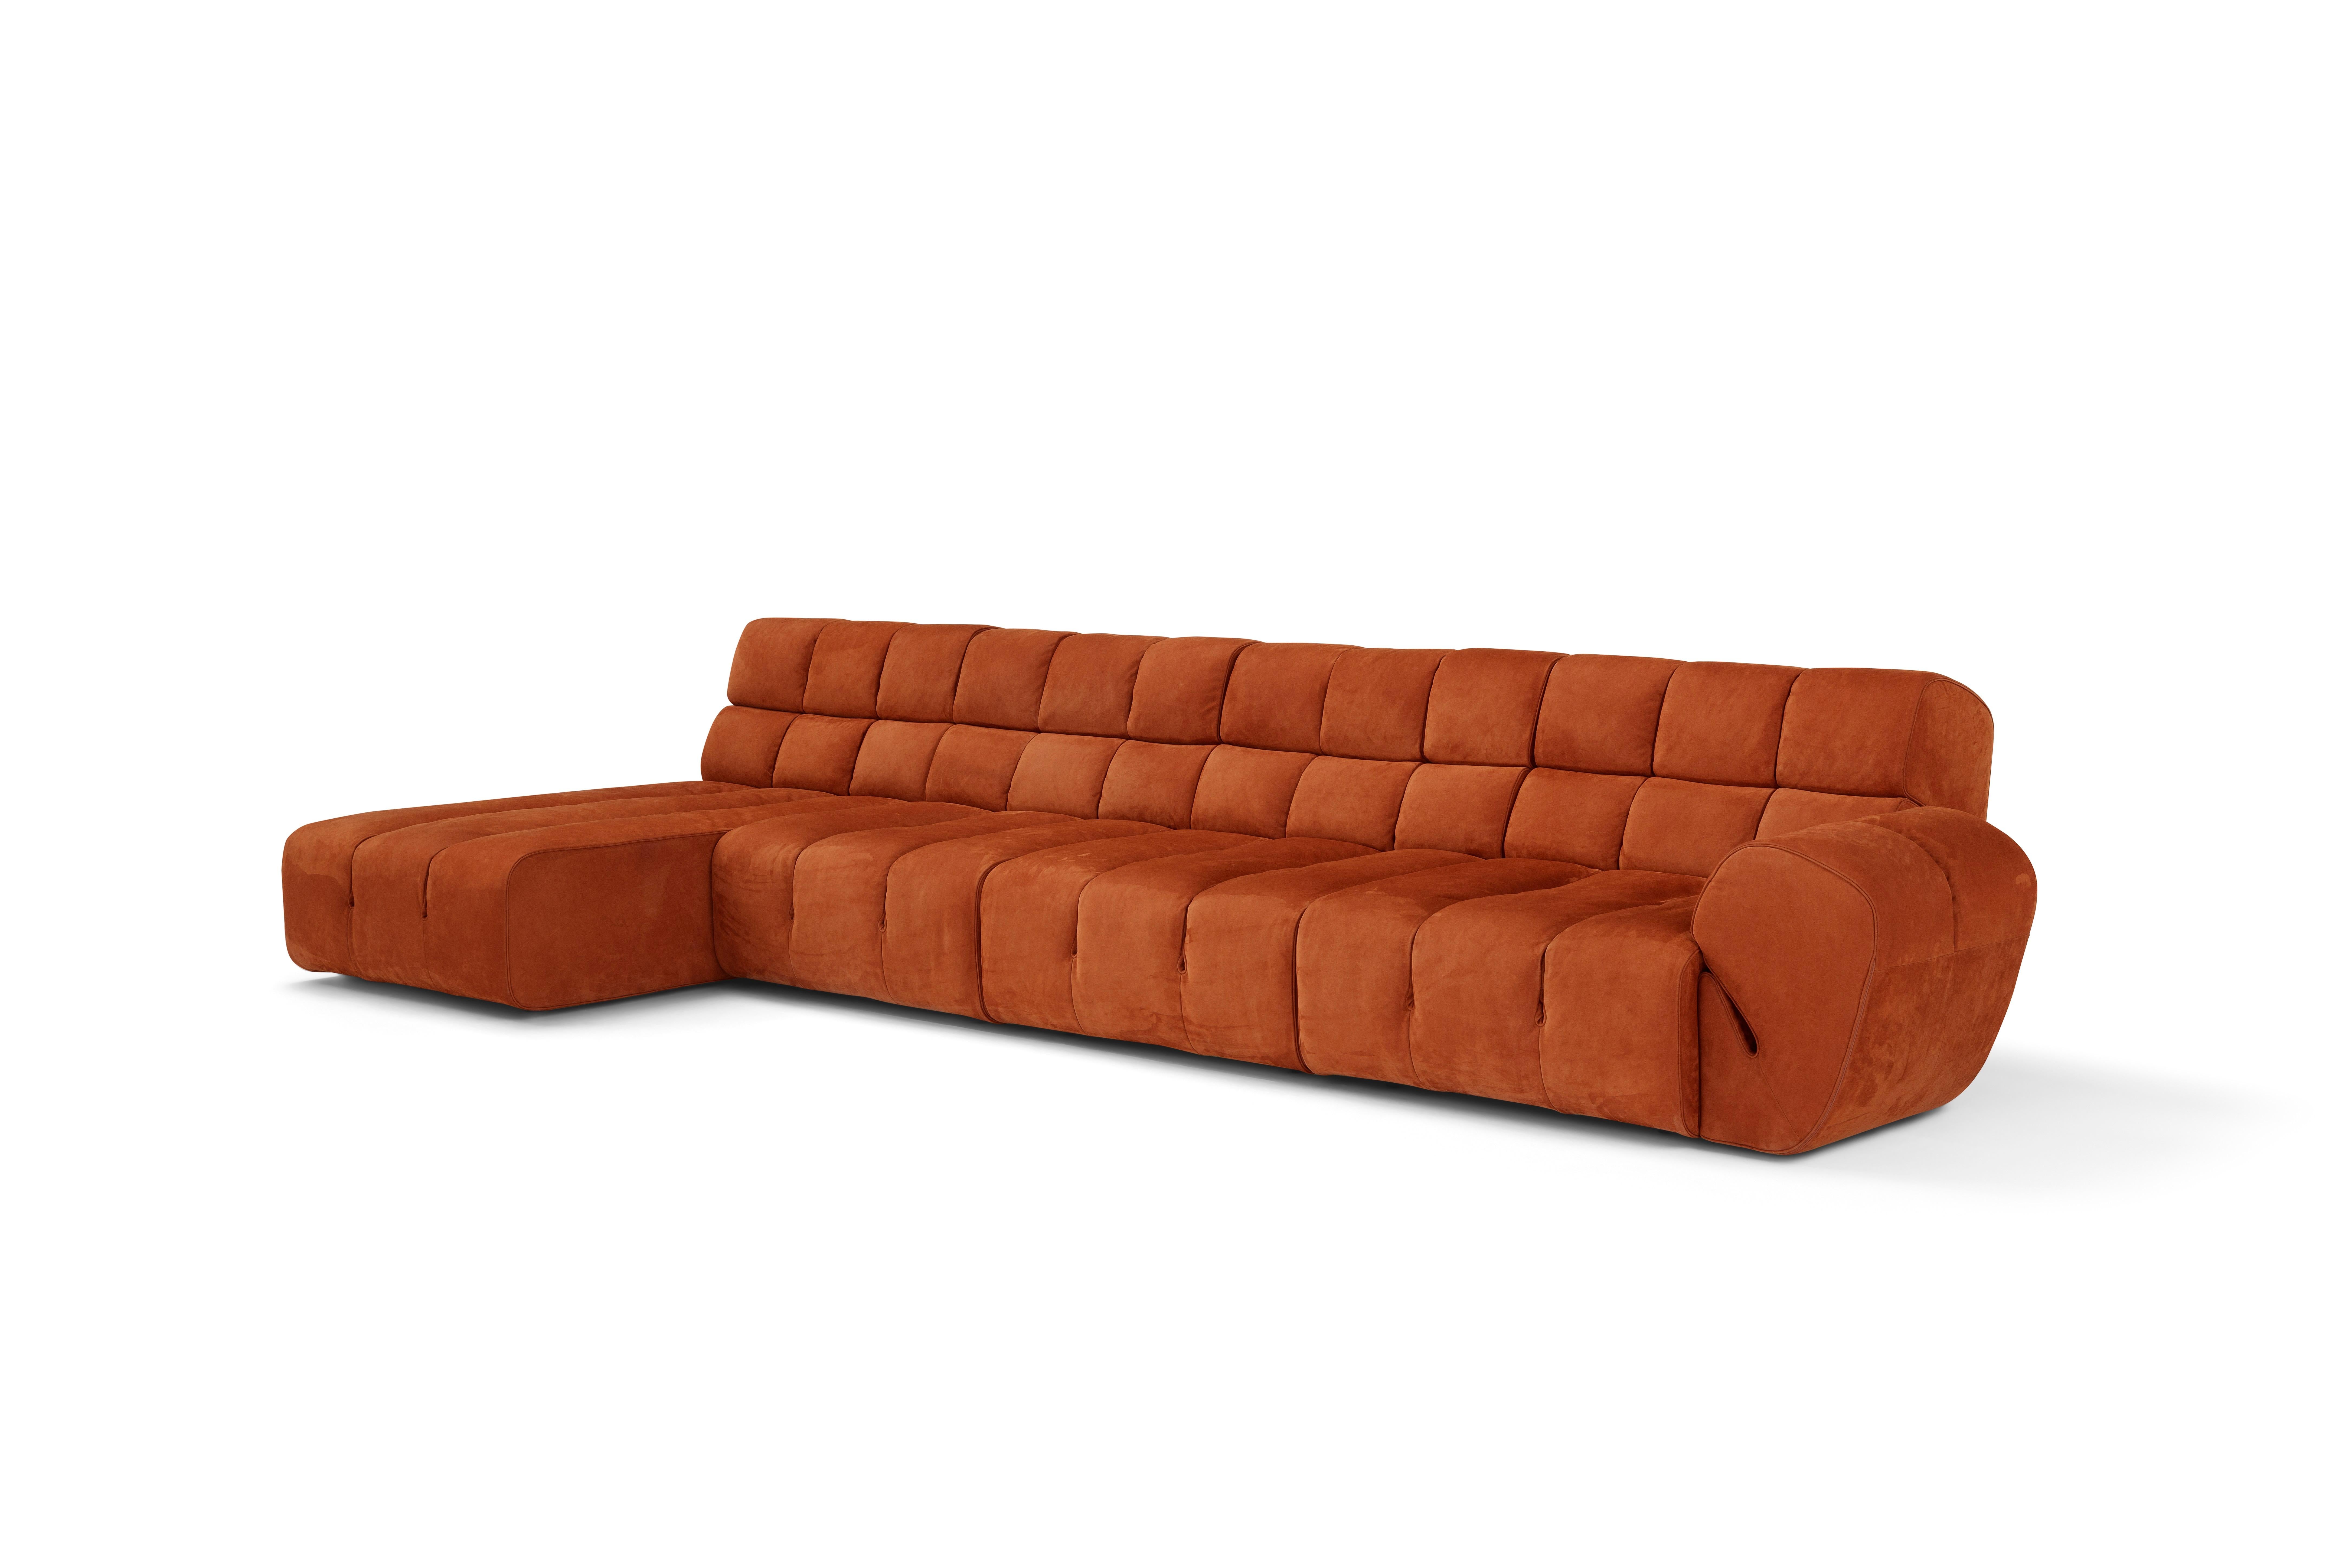 Sectional sofa palmo by Amura Lab 
Designer: Emanuel Gargano

Model shown: Textile - Leather Nabuck 19

Inspired by the natural gesture of an opening hand, Palmo is the new living concept designed by Emanuel Gargano.
The leather folds become